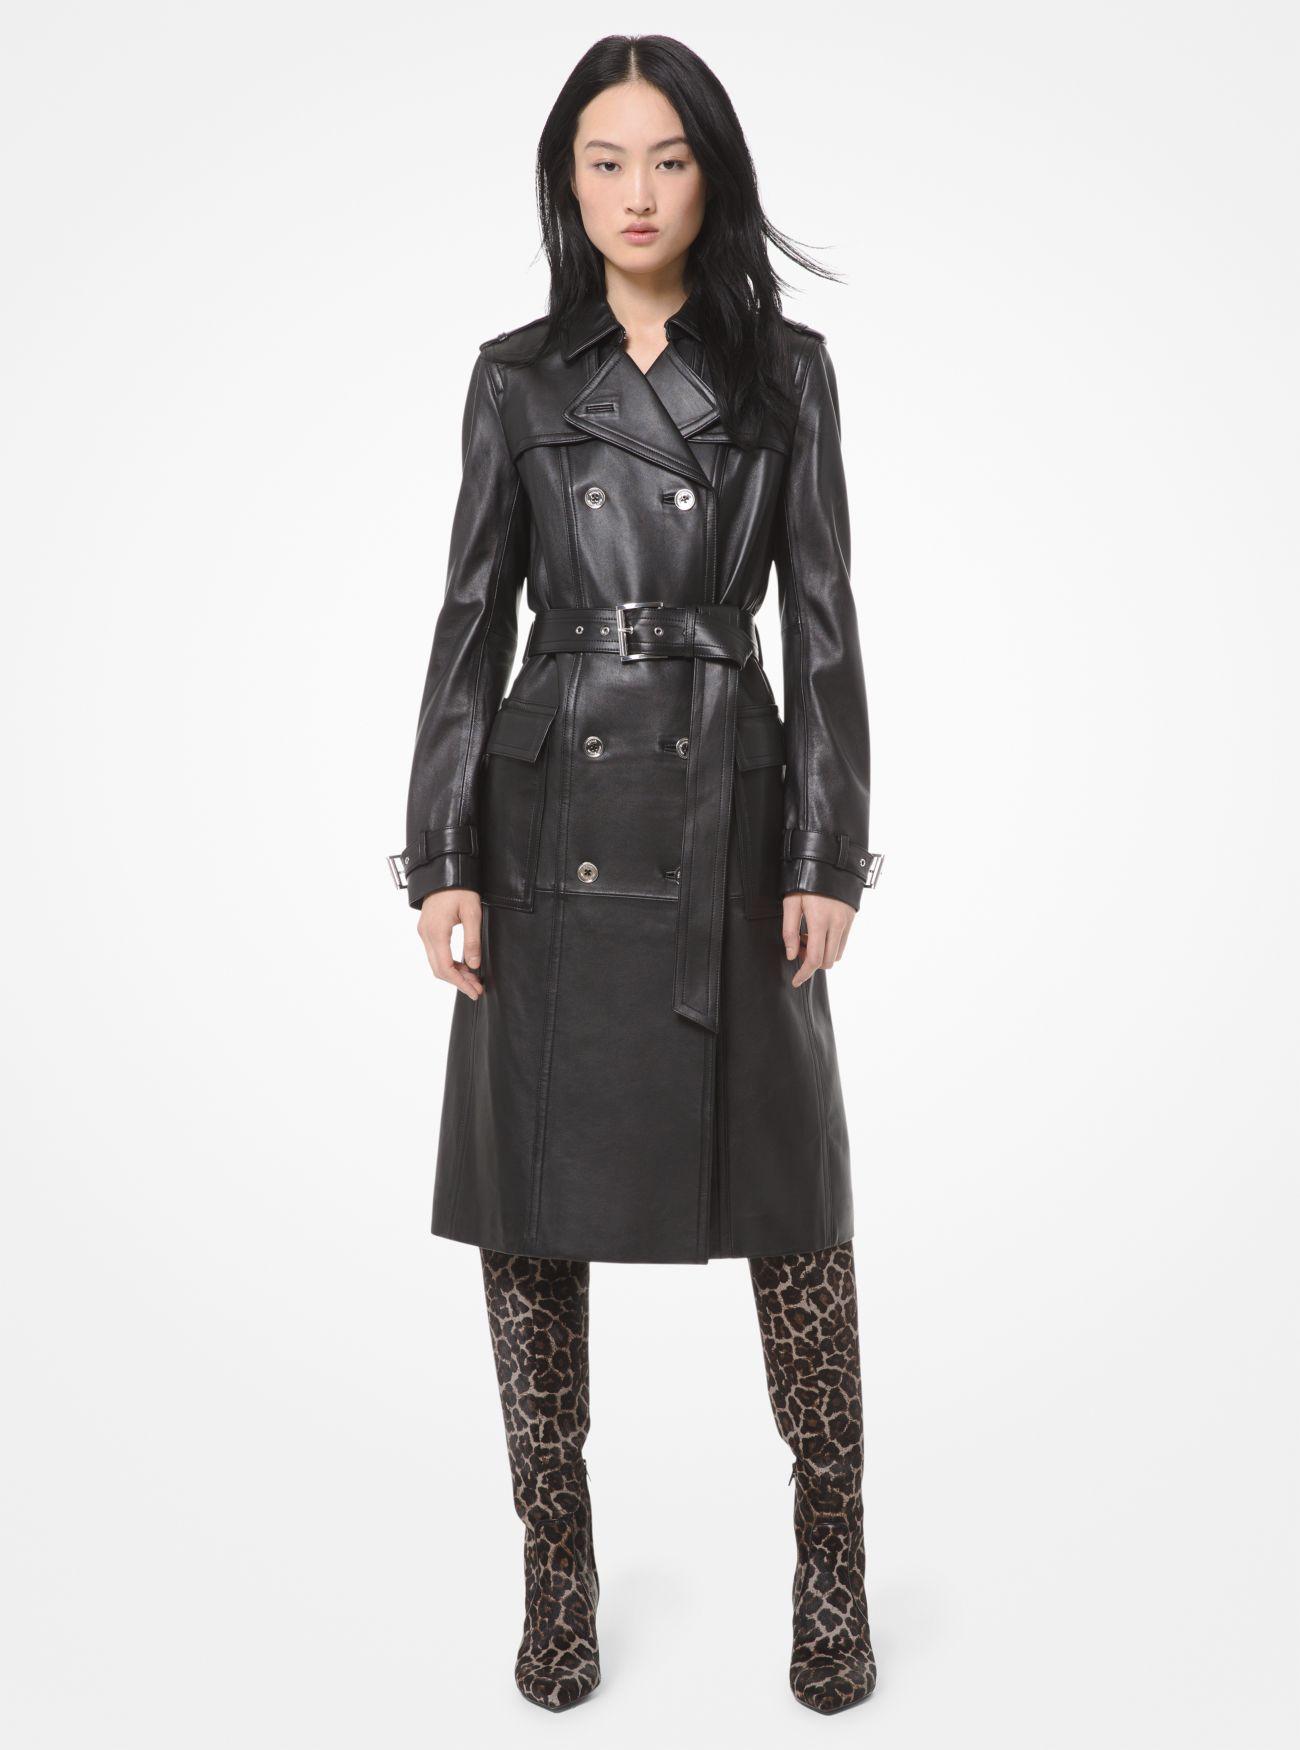 Michael Kors Leather Trench Coat in Black - Lyst